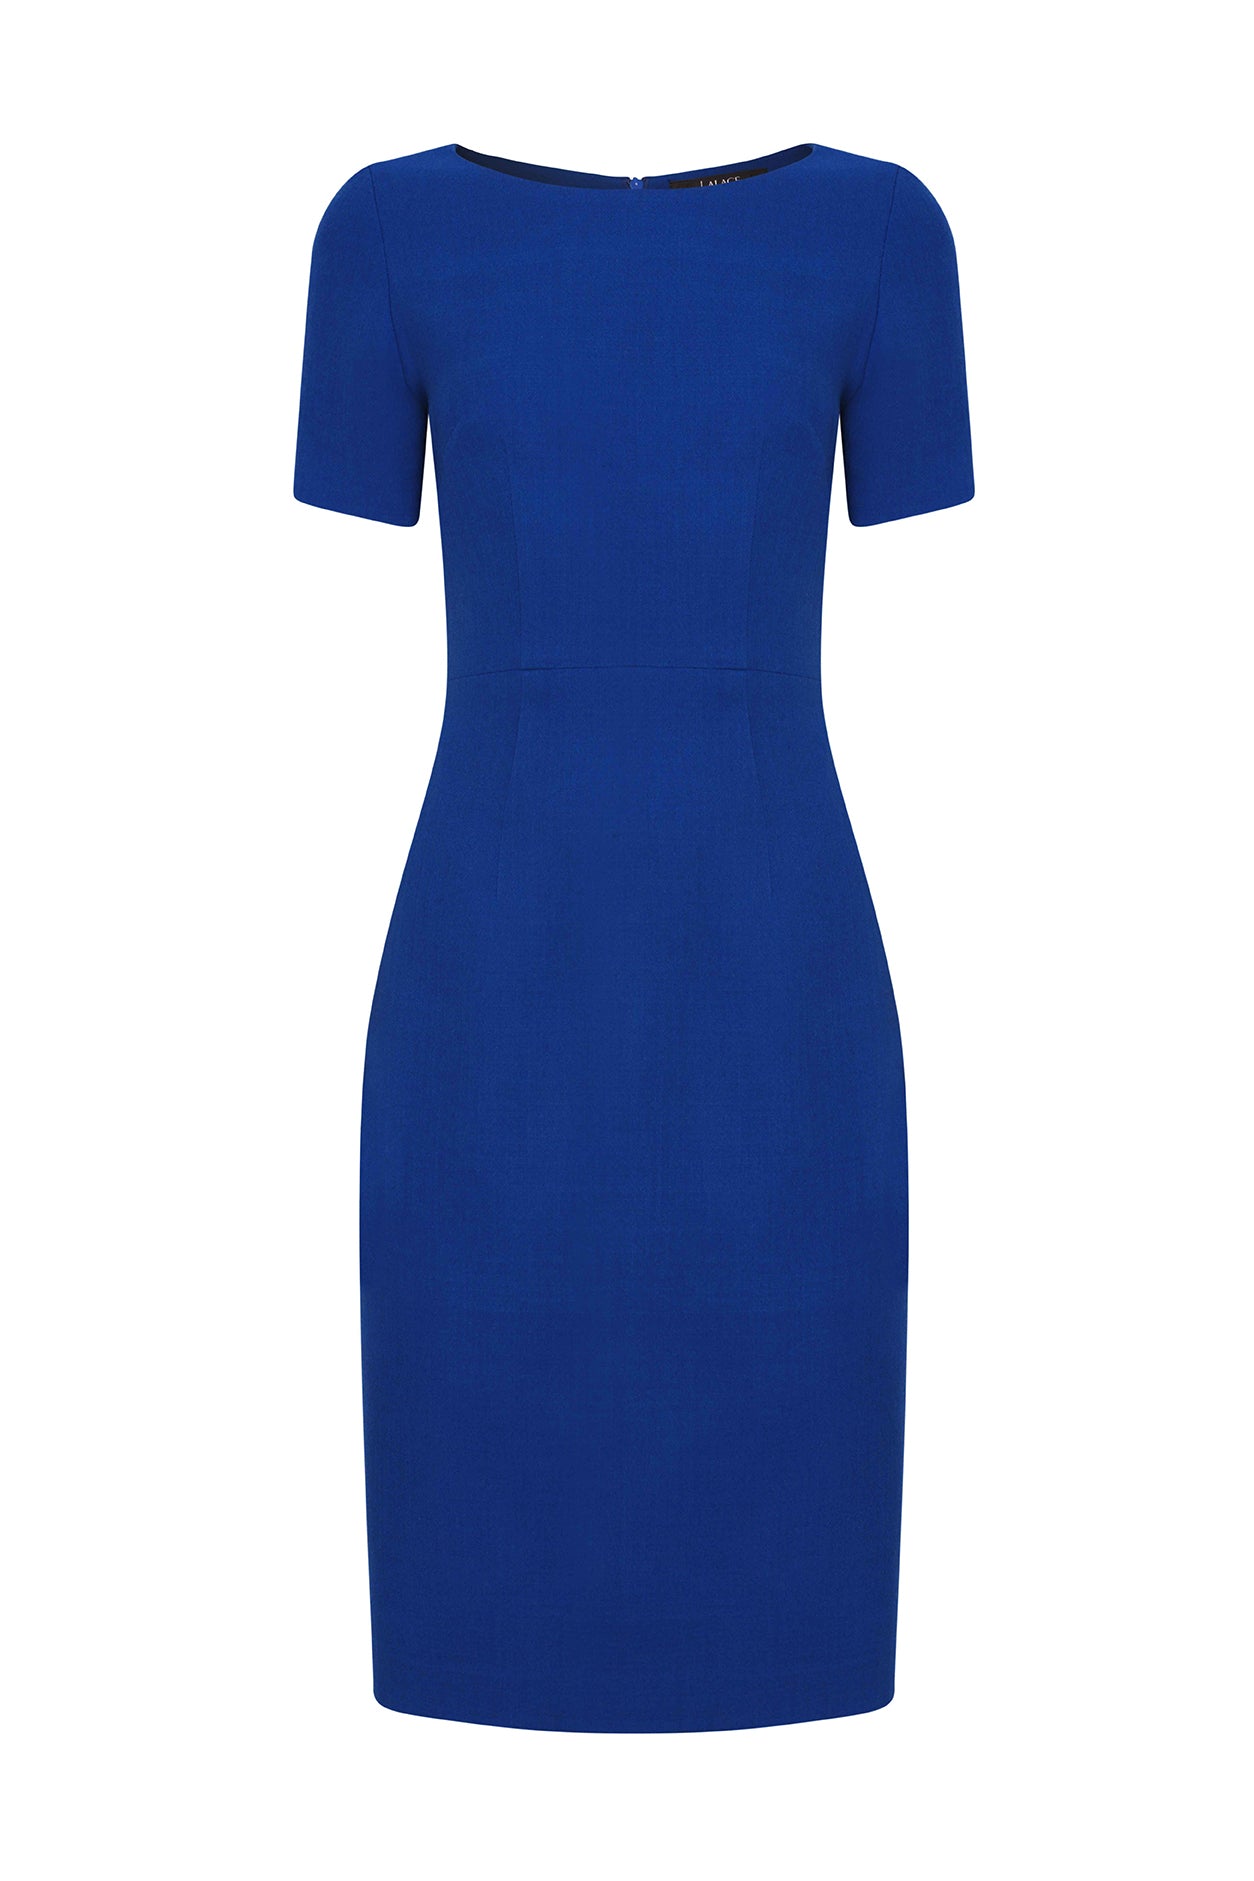 Boat Neck Shift Dress with Short Sleeves in Plain Royal Blue Wool Faille - Angie